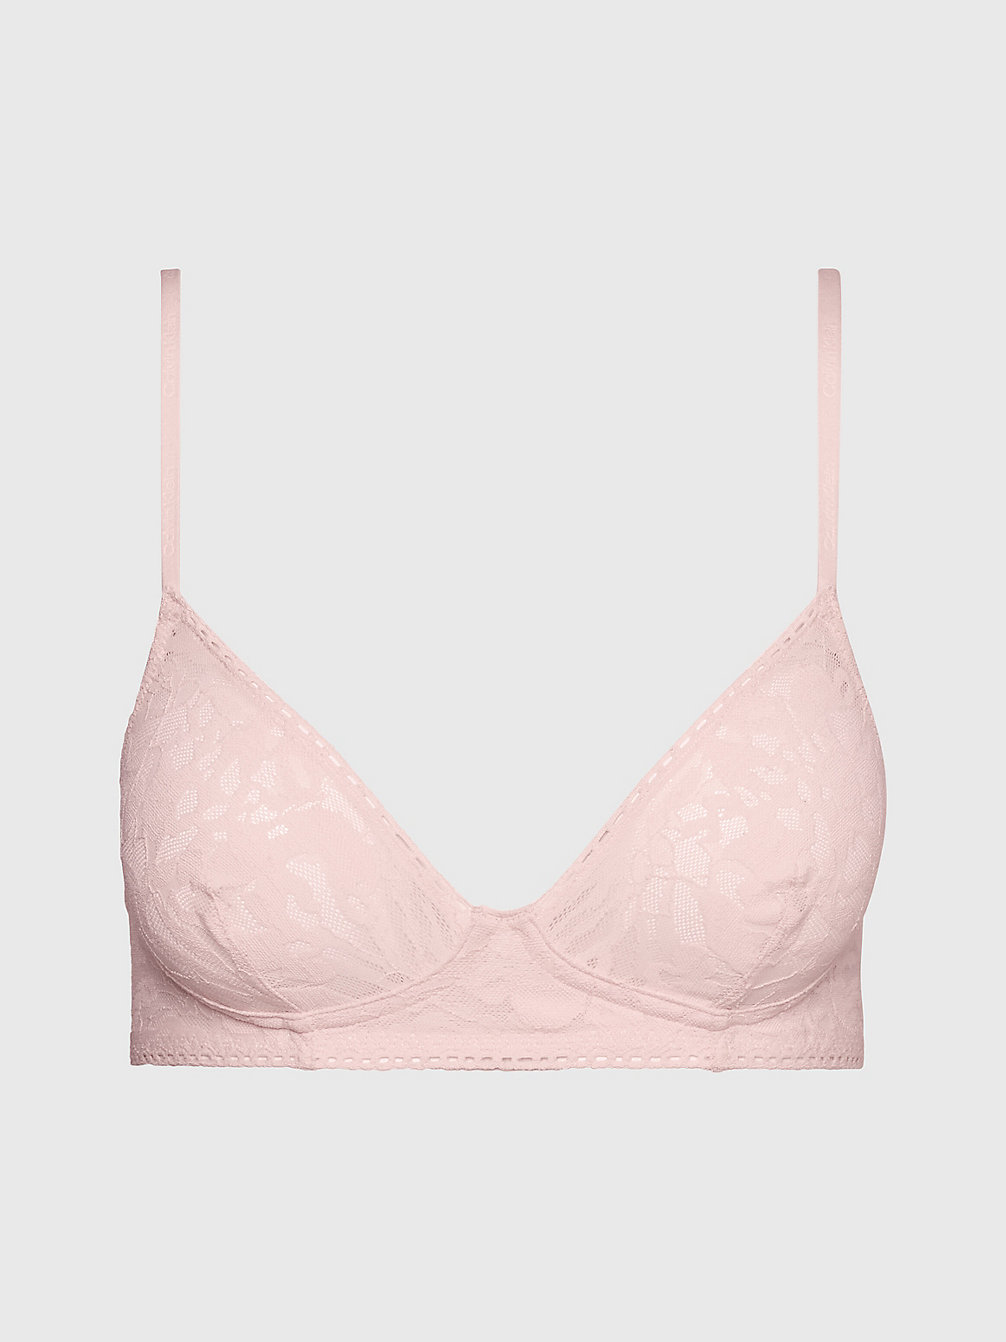 Brassière - Ultra Soft Lace > NYMPTHÂ€™S THIGH > undefined donna > Calvin Klein